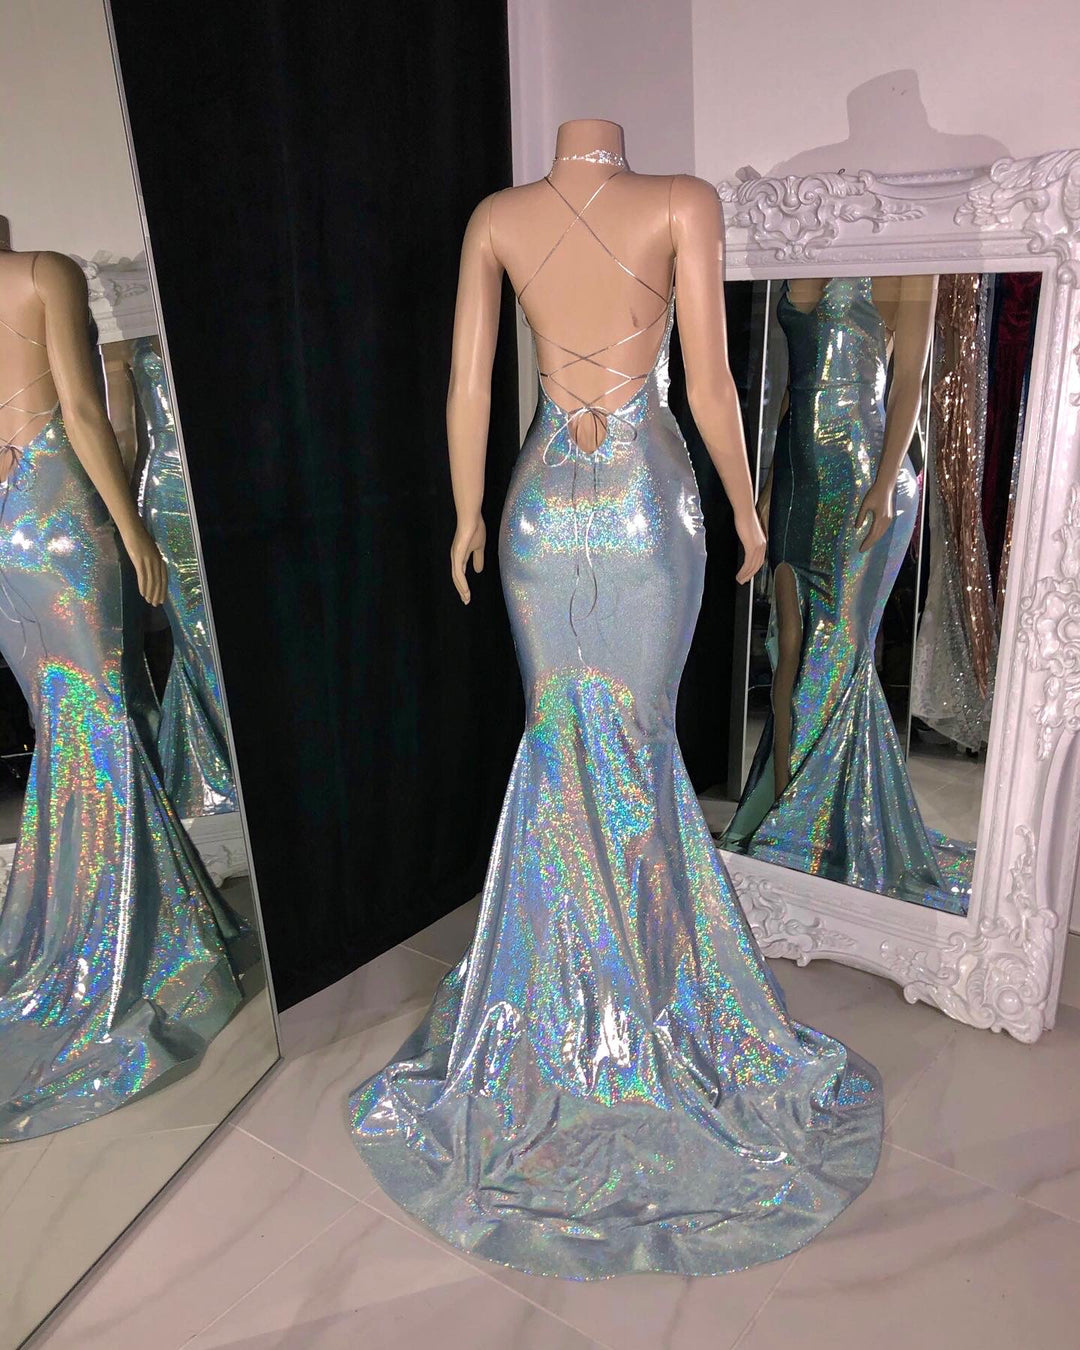 The GIGI Holographic Gown